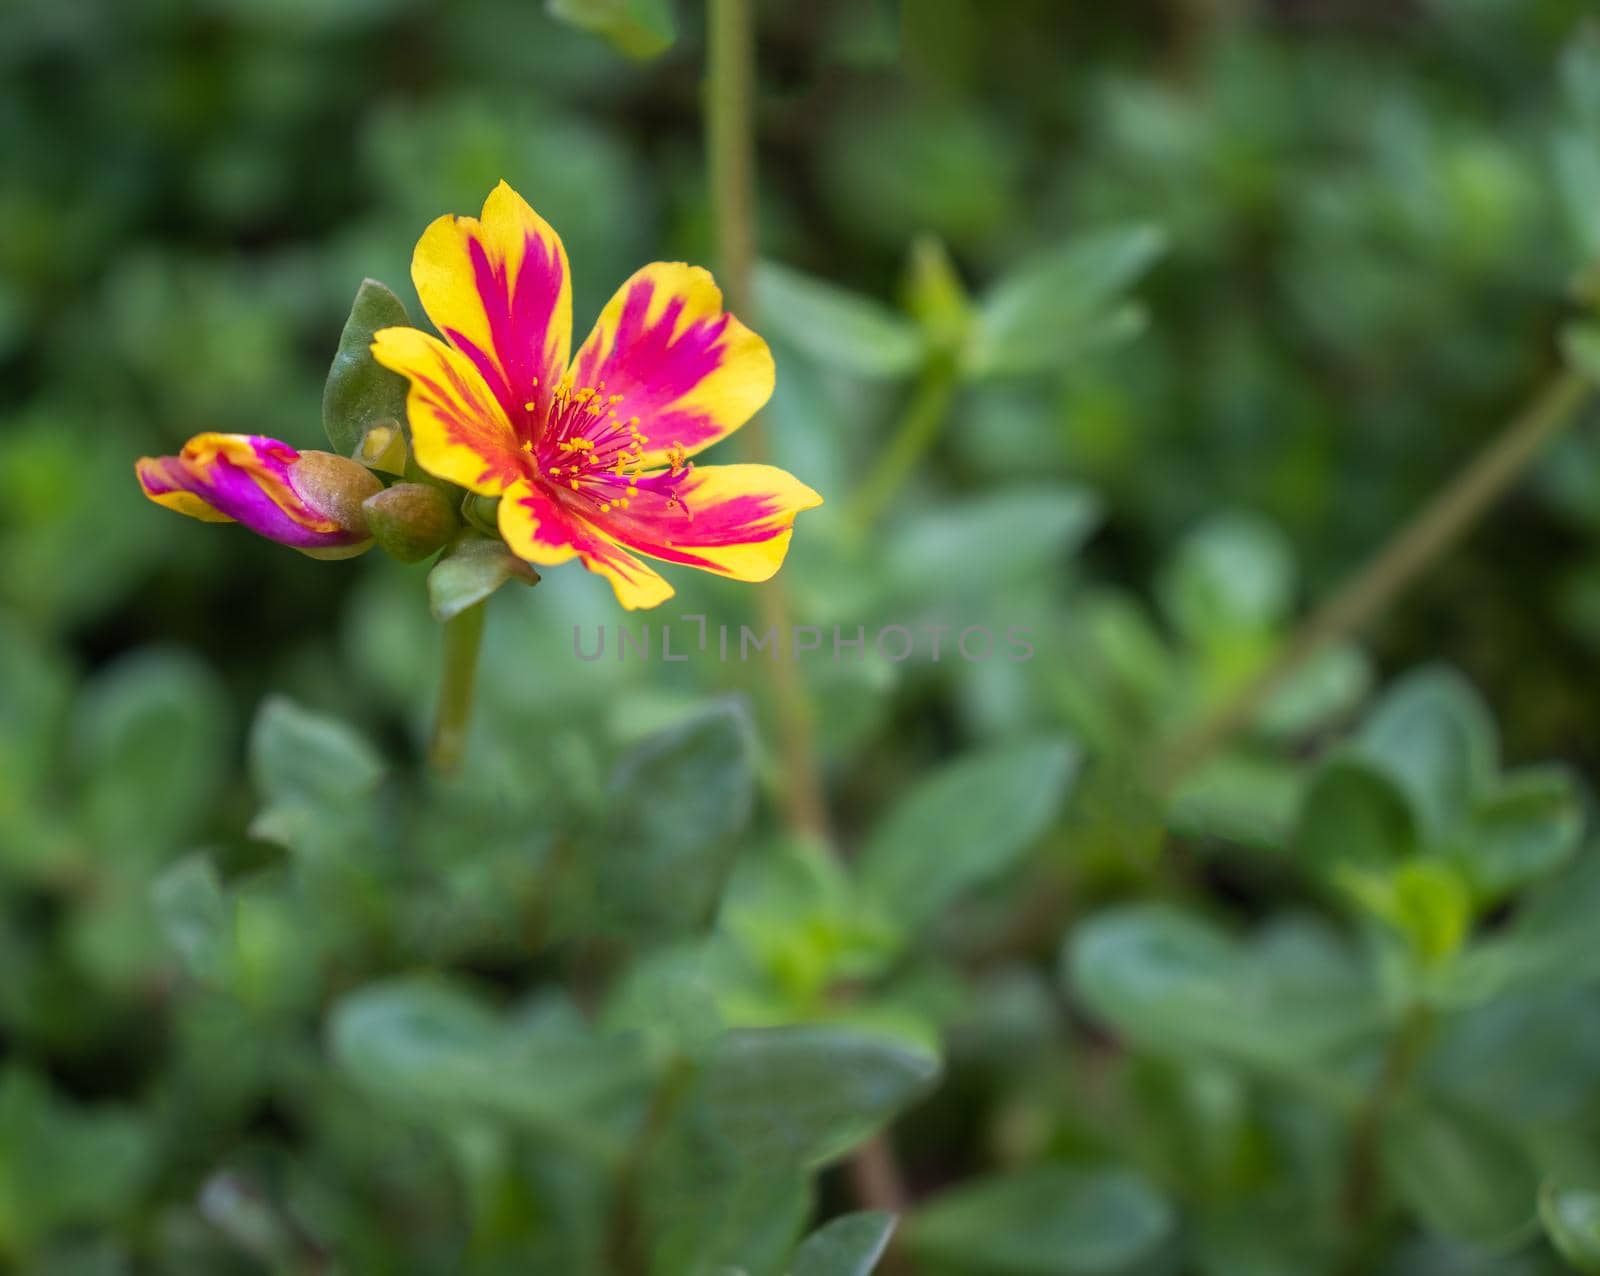 Beautiful cosmos flowers by suththisumdeang